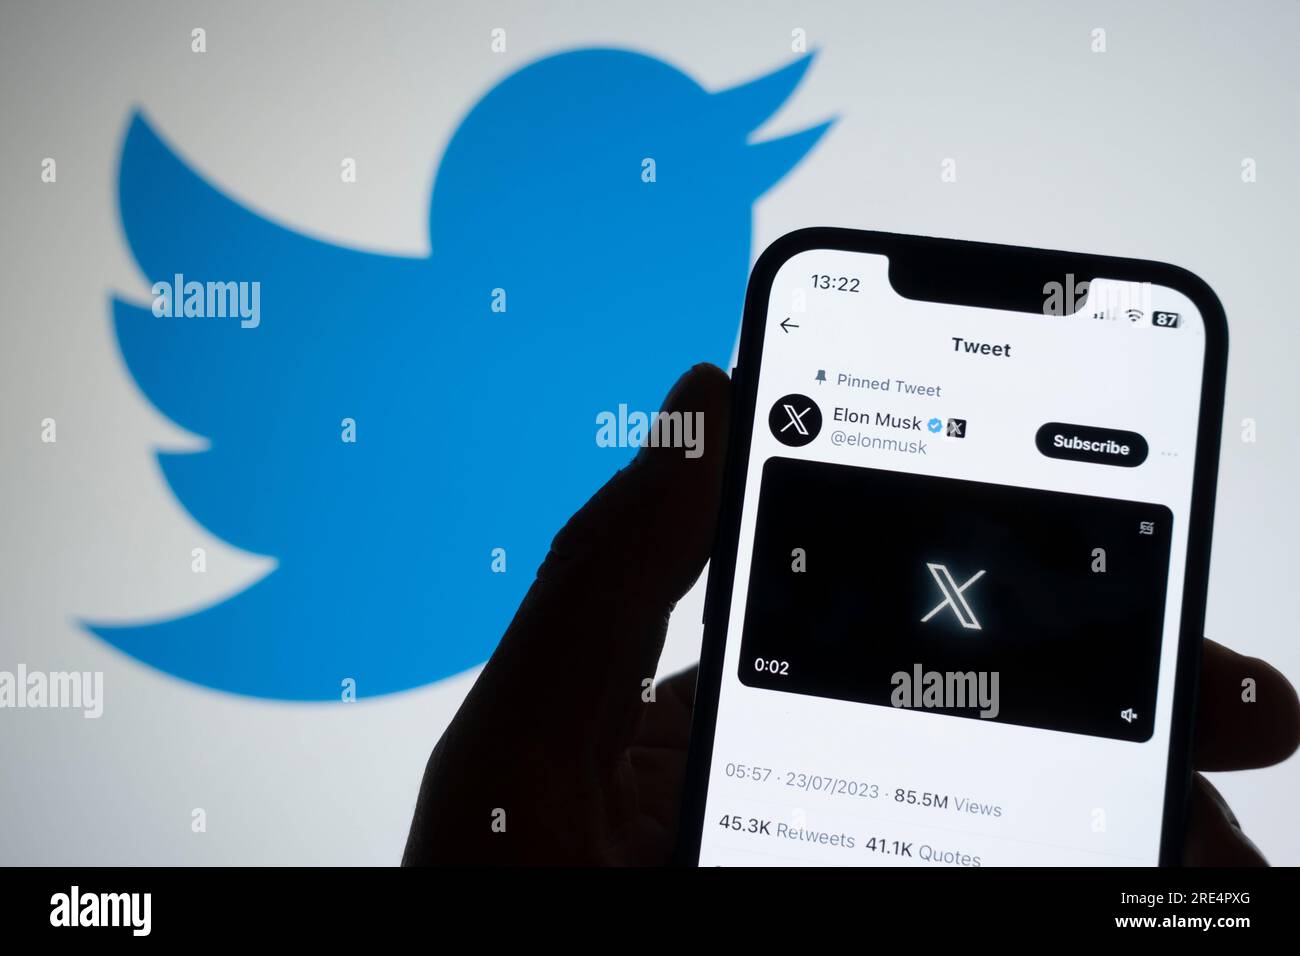 Edinburgh, Scotland, UK. 25 July 2023. A photo illustration showing Elon Musks X page  and the bird logo of the old Twitter which has been rebranded X by owner Elon Musk. Iain Masterton/Alamy Live News Stock Photo